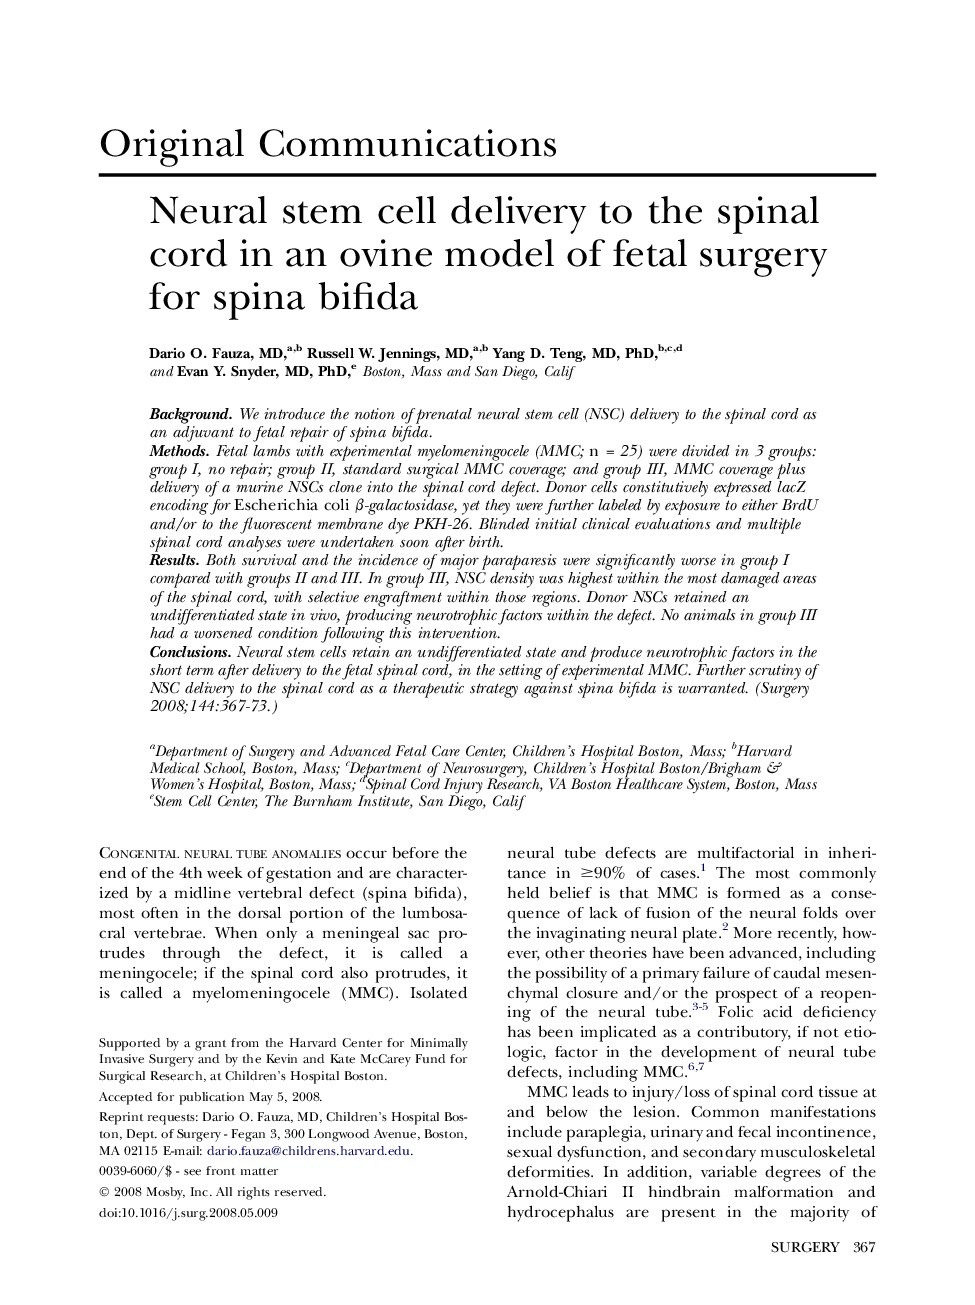 Neural stem cell delivery to the spinal cord in an ovine model of fetal surgery for spina bifida 